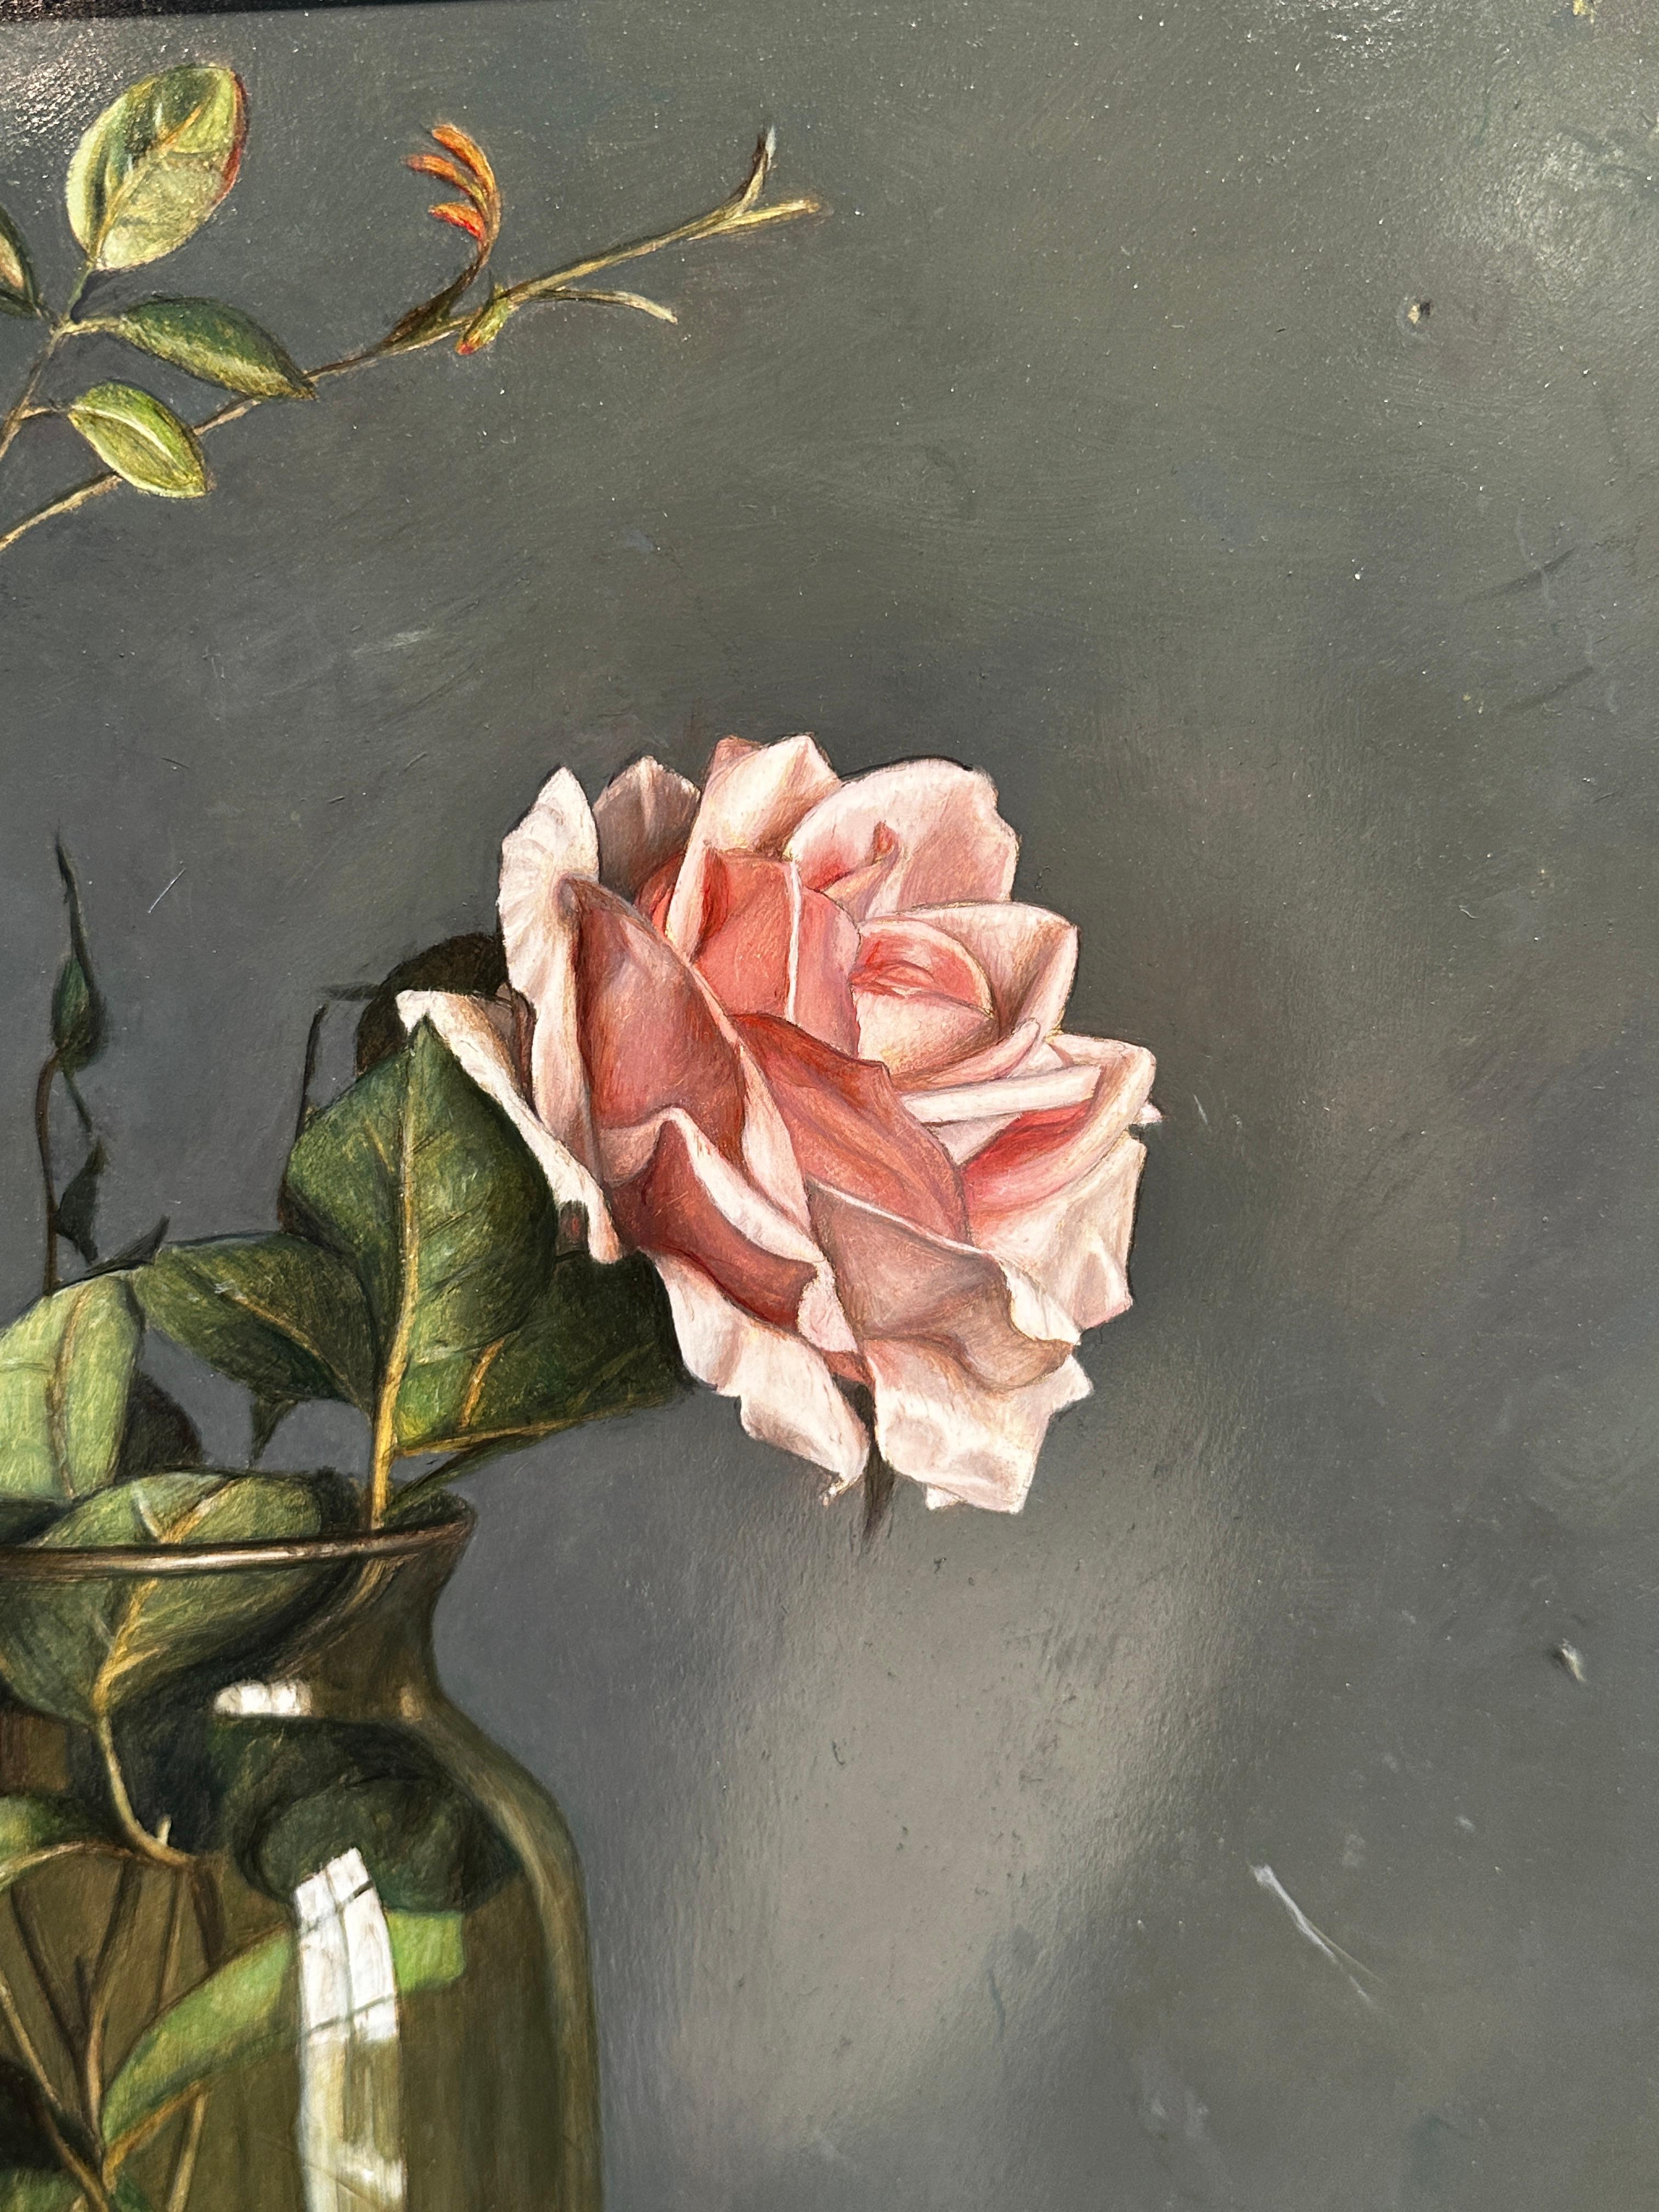 'Clementines & Roses' is a fabulous example of Lijftogt's work. Such amazing eye for detail is what makes this piece such a knockout piece. A beautiful colour palette has been used to create a stunning composition.

Lijftogt was born in Amsterdam